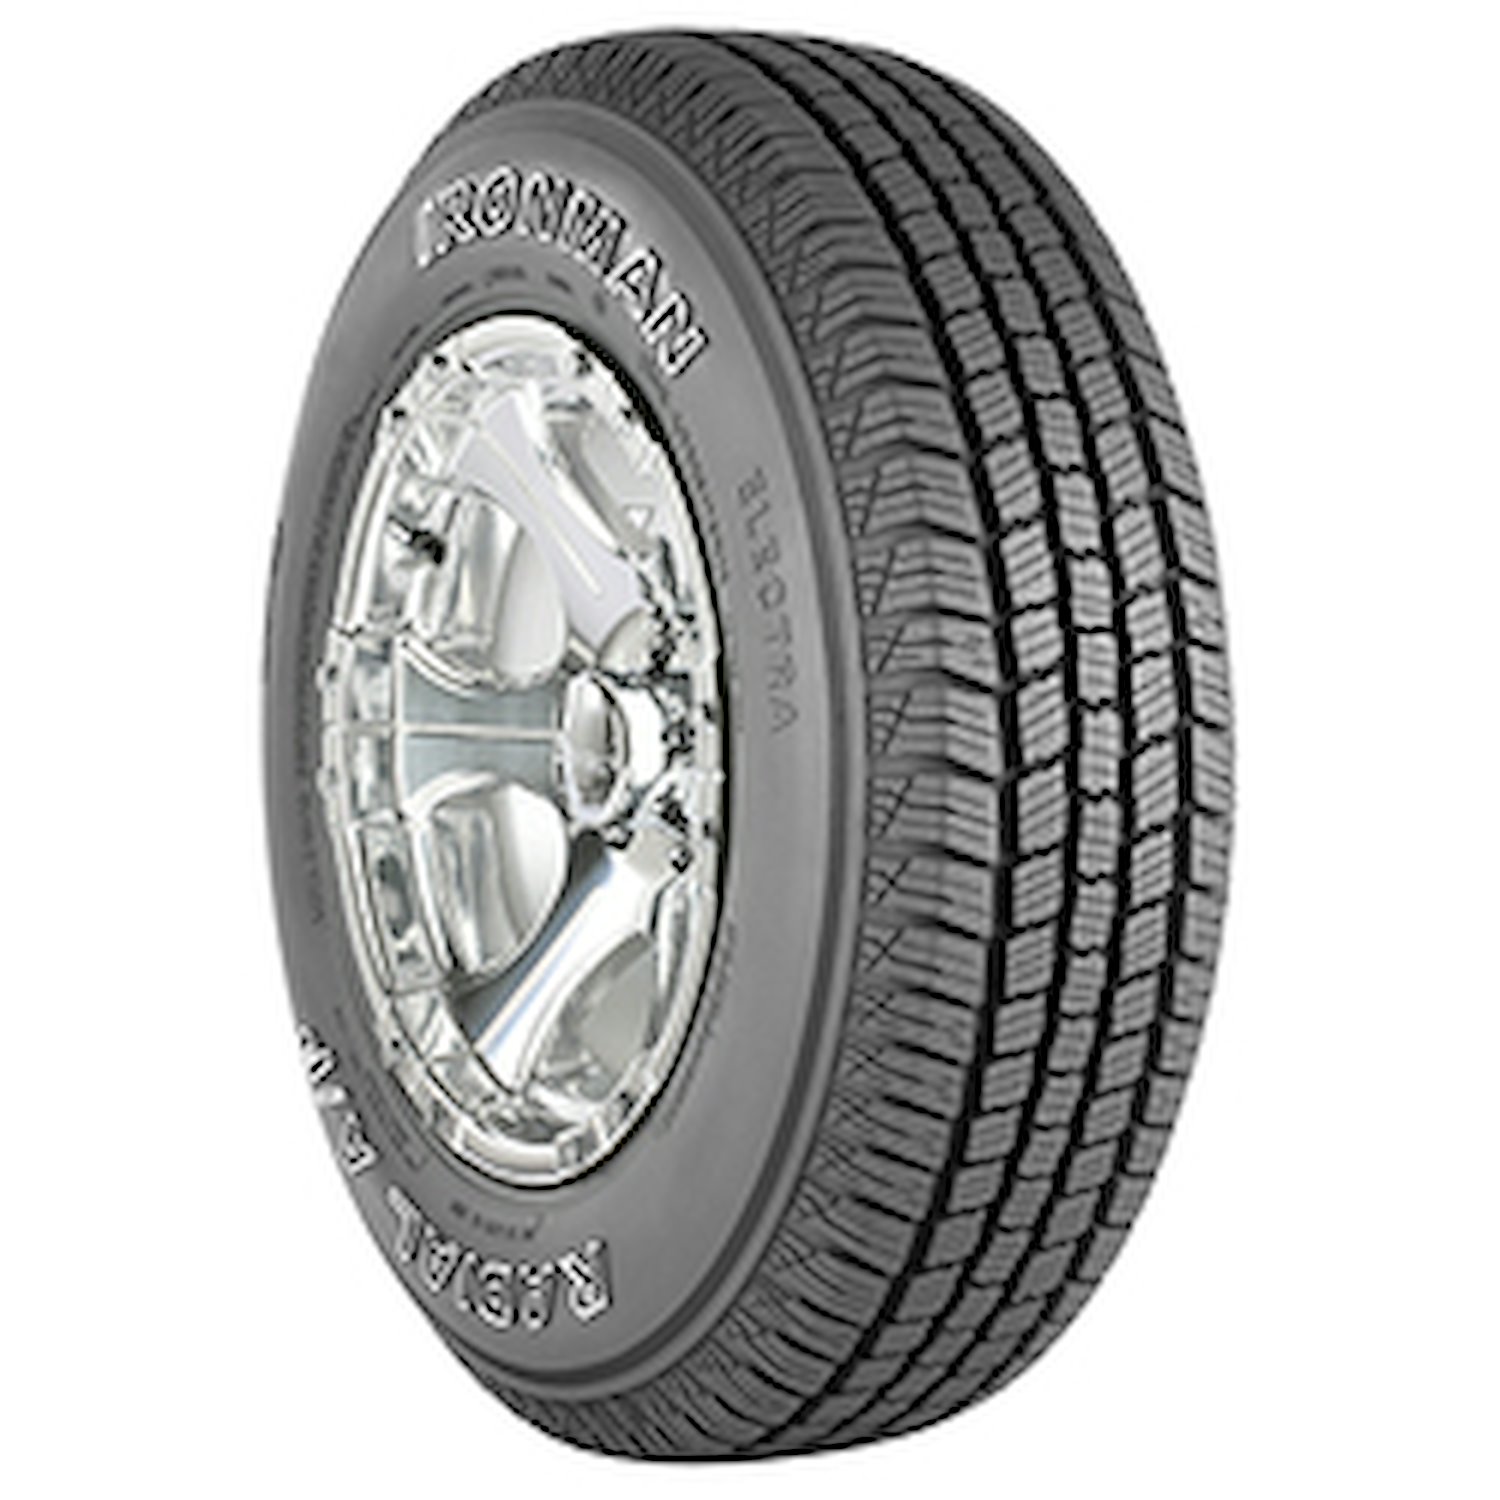 Radial A/P Tire, 235/65R17 104T